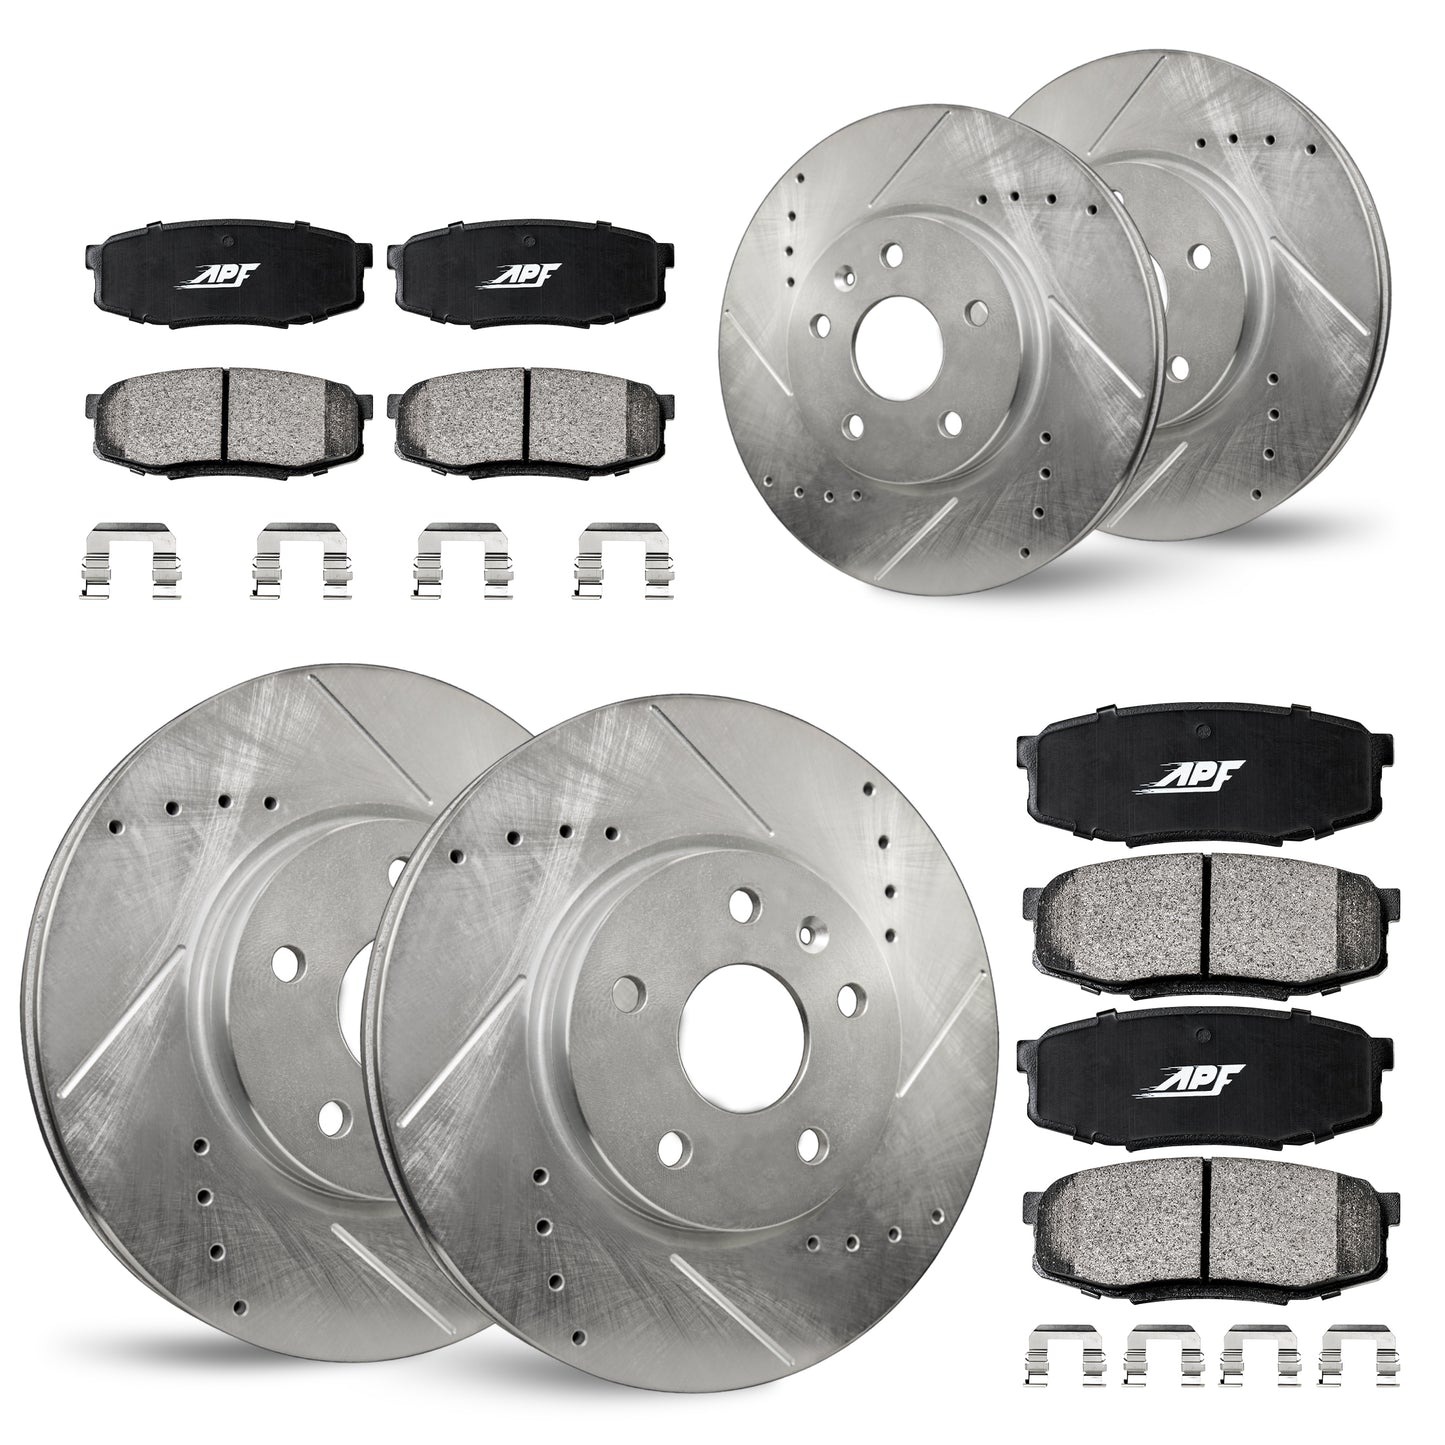 APF Full Kit compatible with INFINITI Q50 2014-2019 | Zinc Drilled Slotted Rotors with Ceramic Carbon Fiber Brake Pads